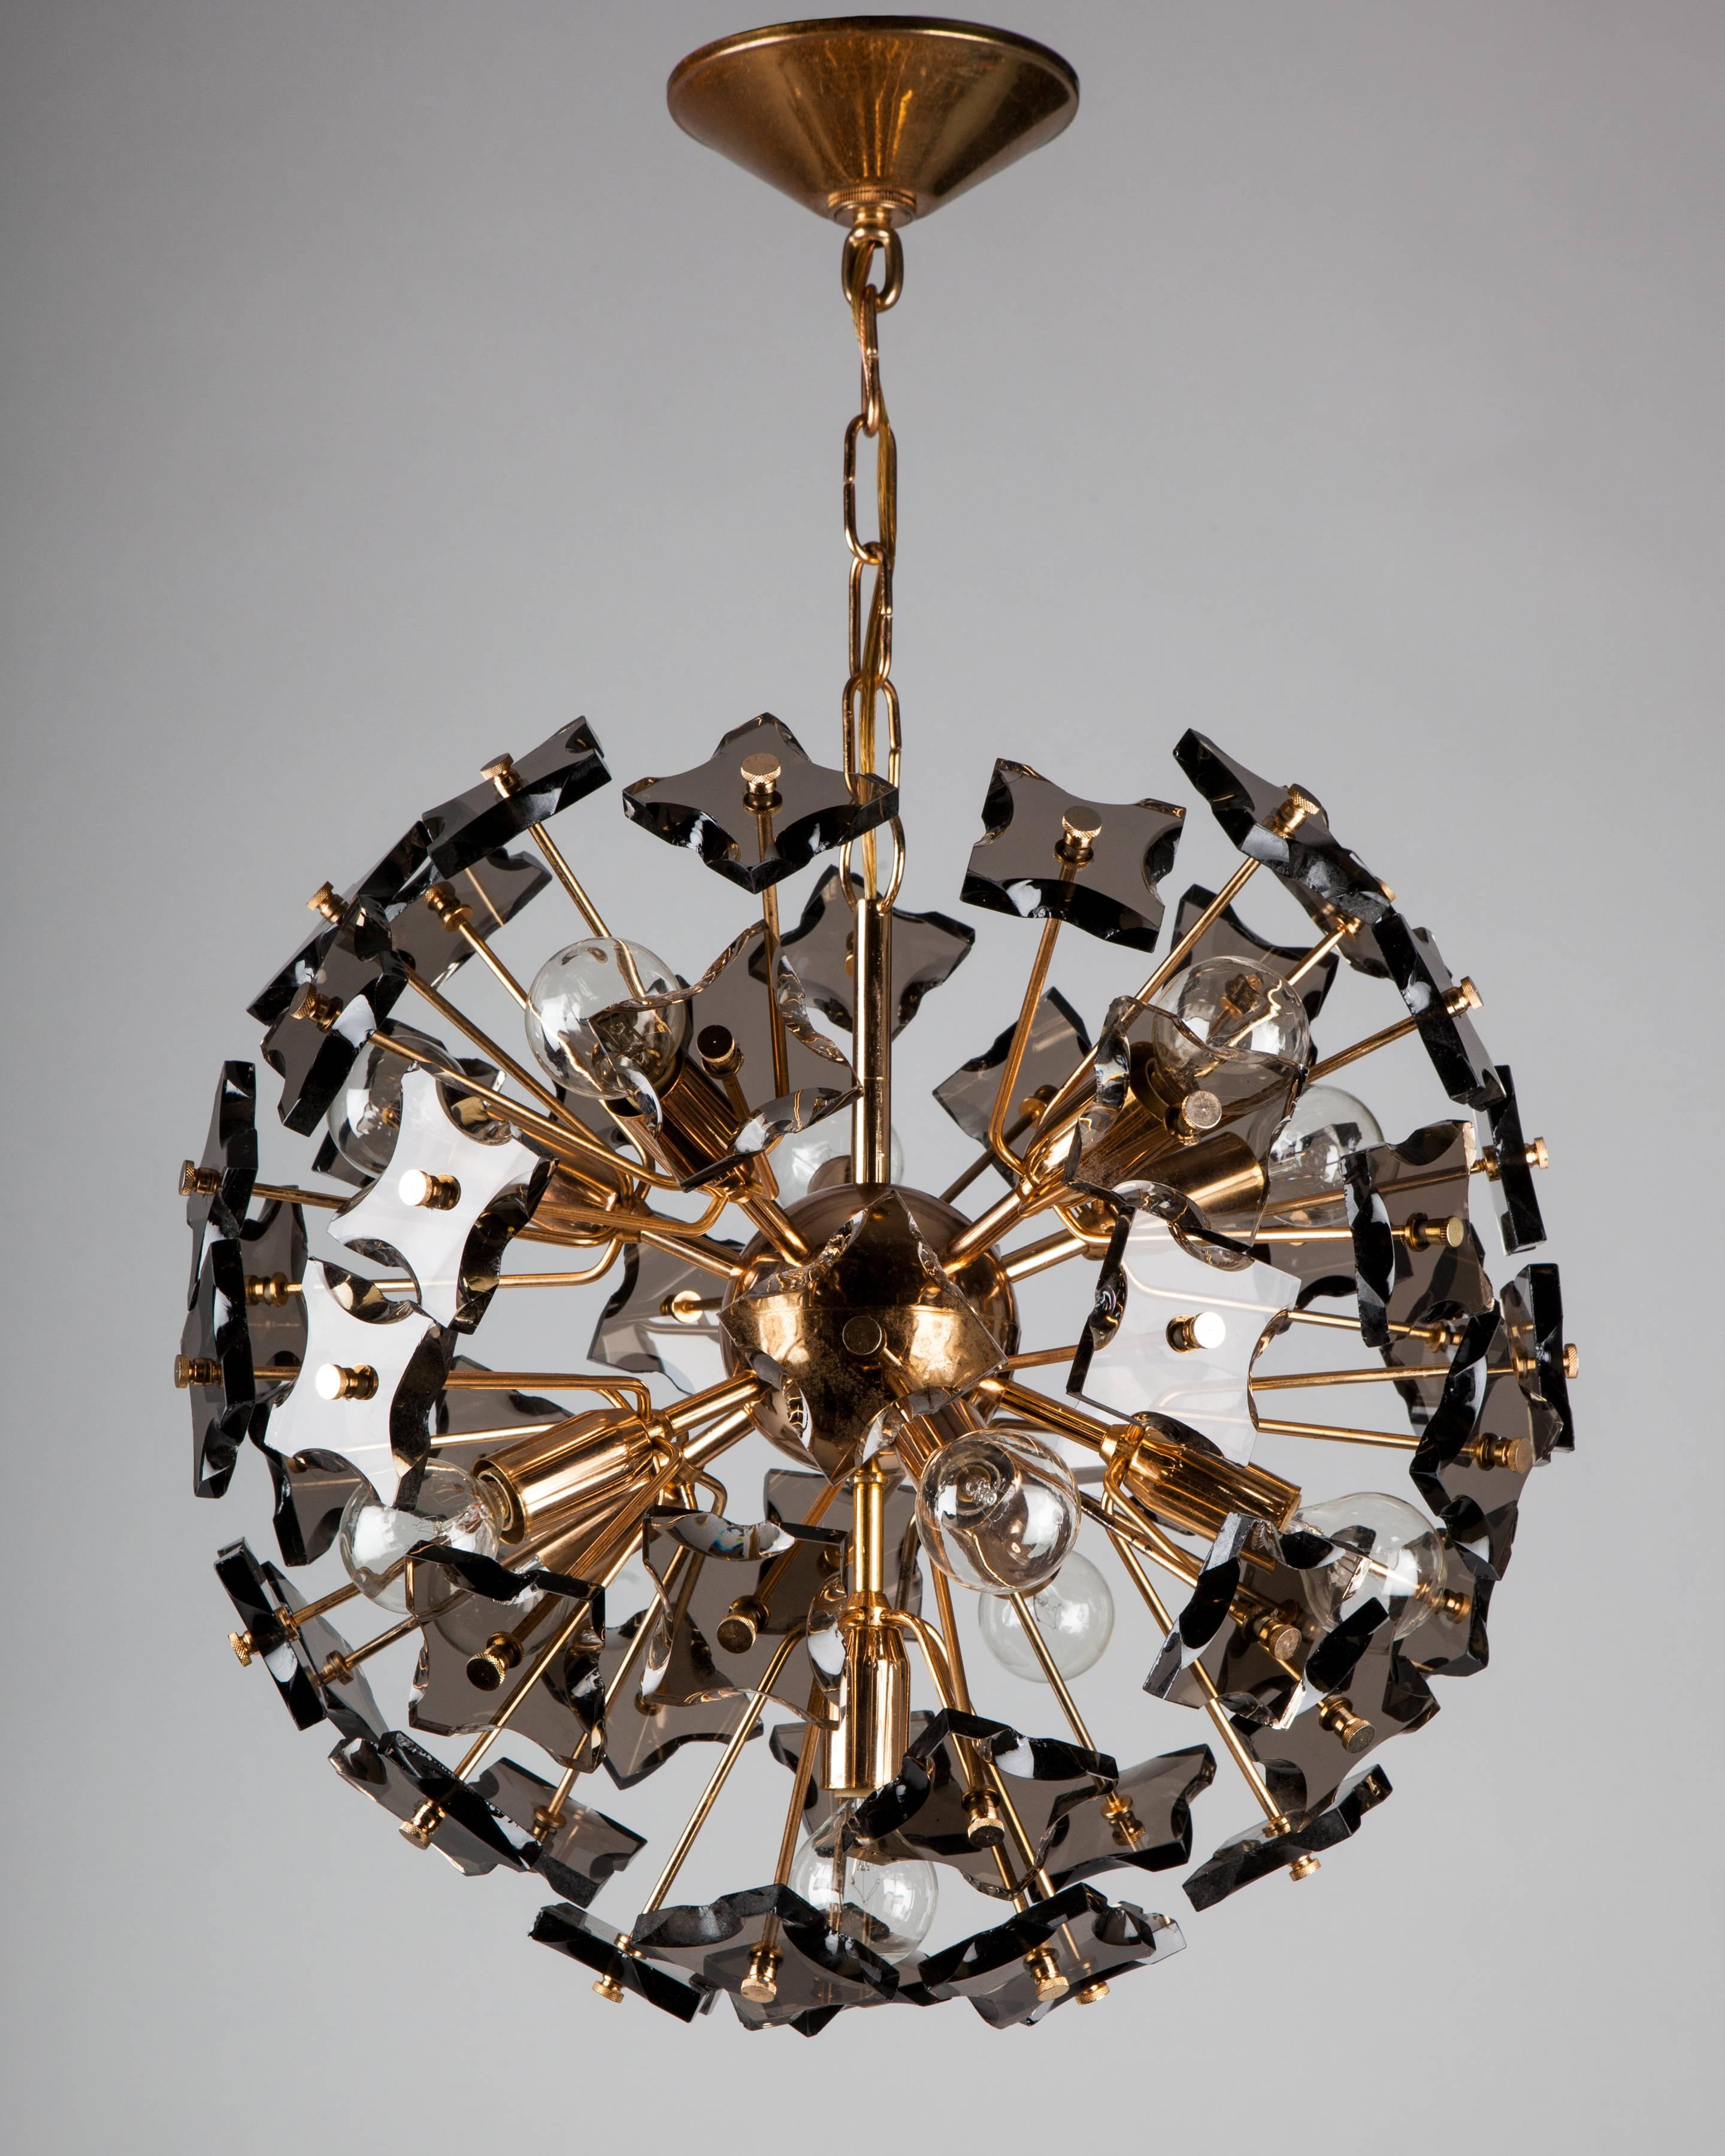 AHL4096
A vintage sputnik form chandelier with smoke glass elements in its original warm rose gold finish. Attributed to the Italian maker Fontana Arte. Due to the antique nature of this fixture, there are some nicks or imperfections in the